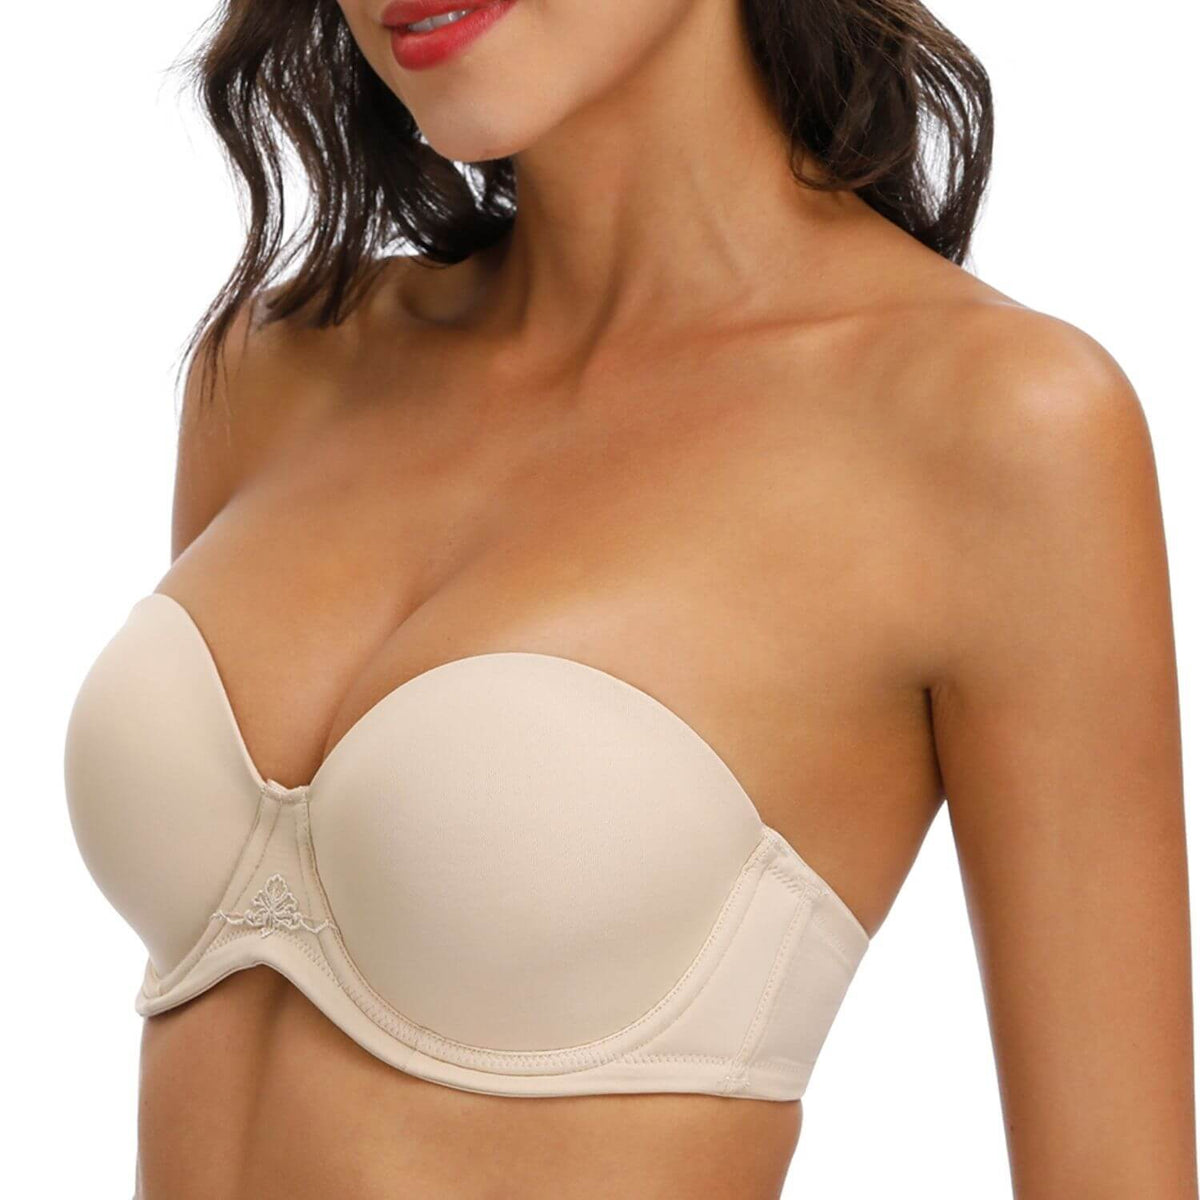  Full Support Non-Slip Convertible Bandeau Bra,Detachable-Strap Bandeau  Bra,Comfort Soft Strapless Push Up Seamless Bralette. (75C, Beige) :  Clothing, Shoes & Jewelry